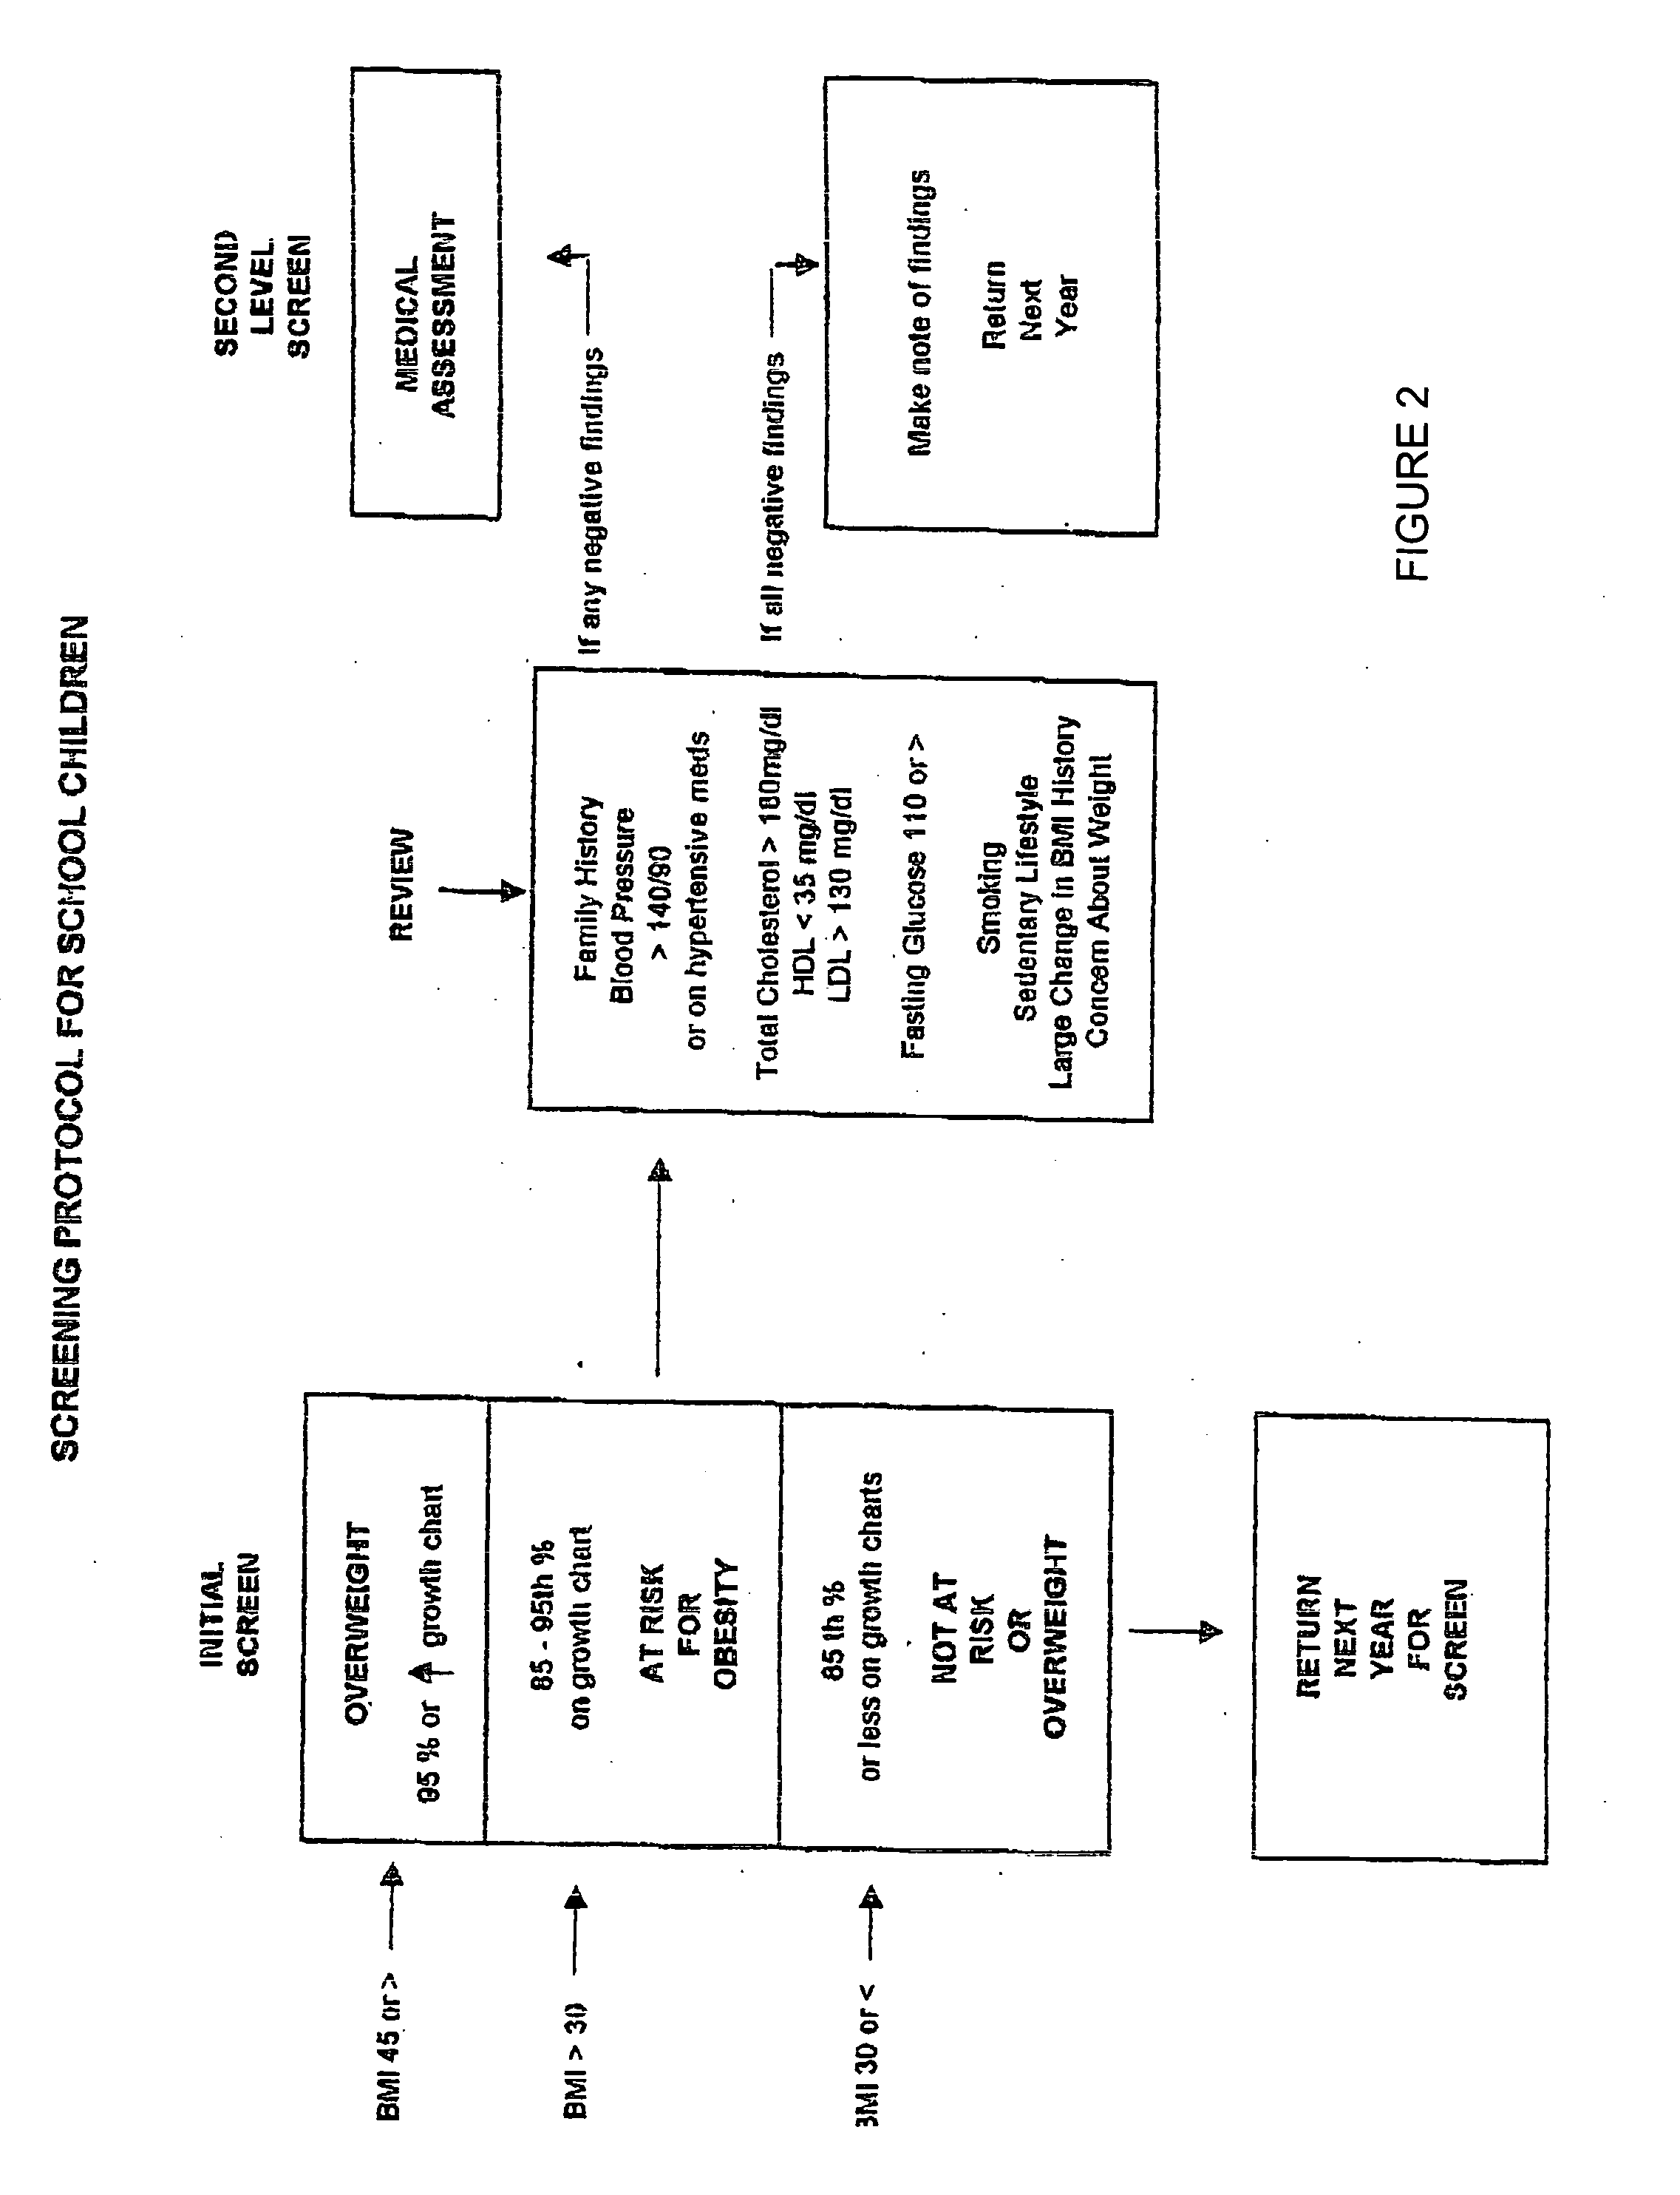 Methods for the treatment of mammals with abnormal glucose tolerance